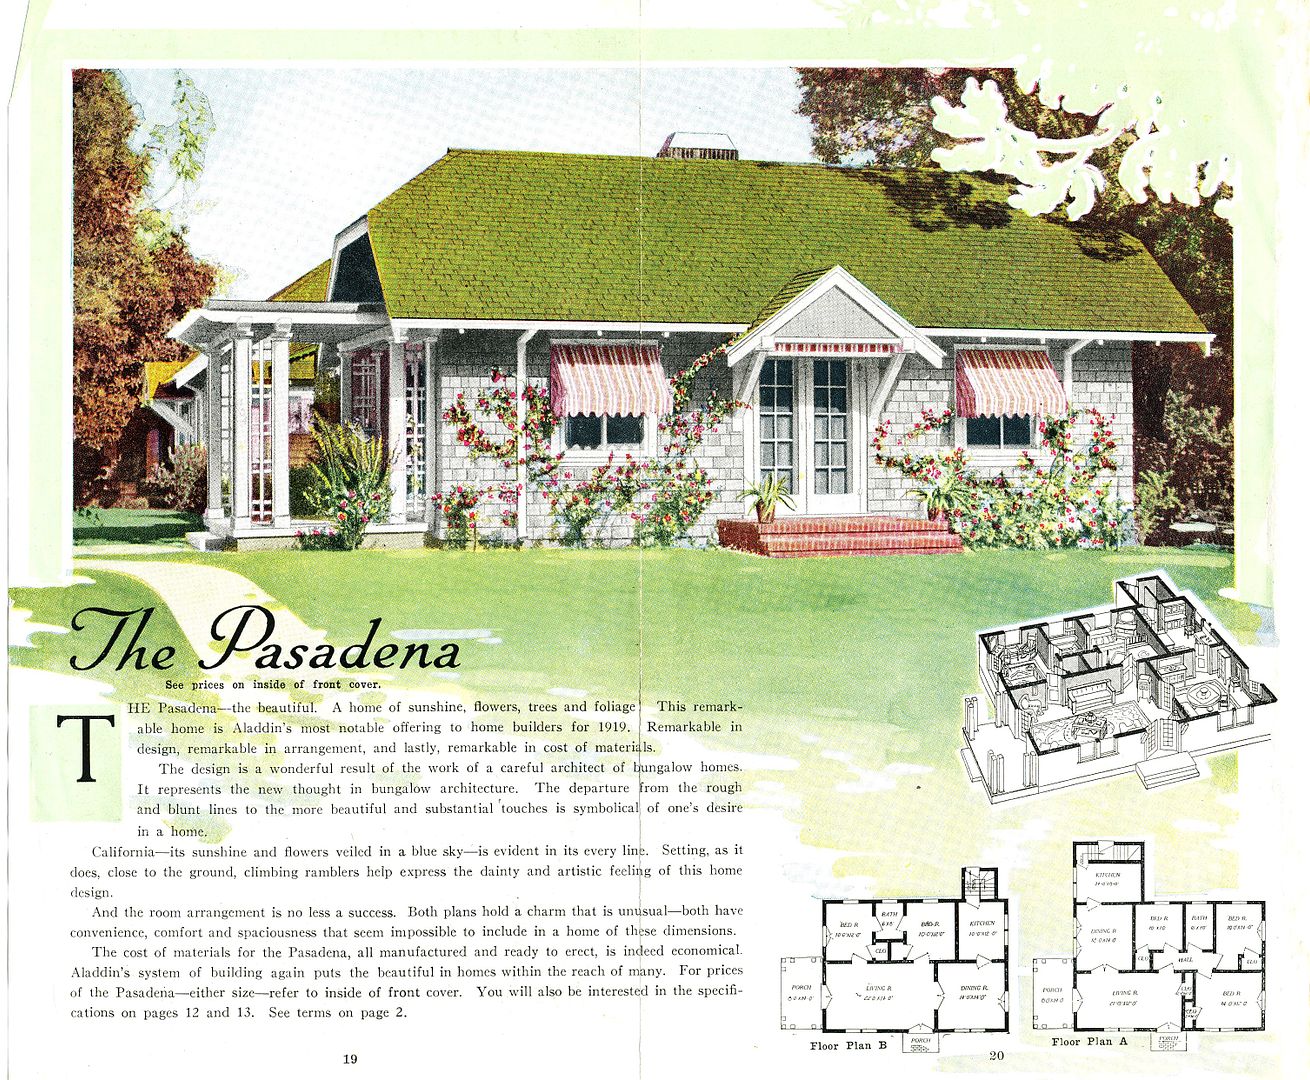 Aladdin had a mill in Wilmington, NC so not surprisingly, I often find more Aladdin kit homes in Virginia than Sears kit homes. Shown above is the Aladdin Pasadena from the 1919 catalog. 